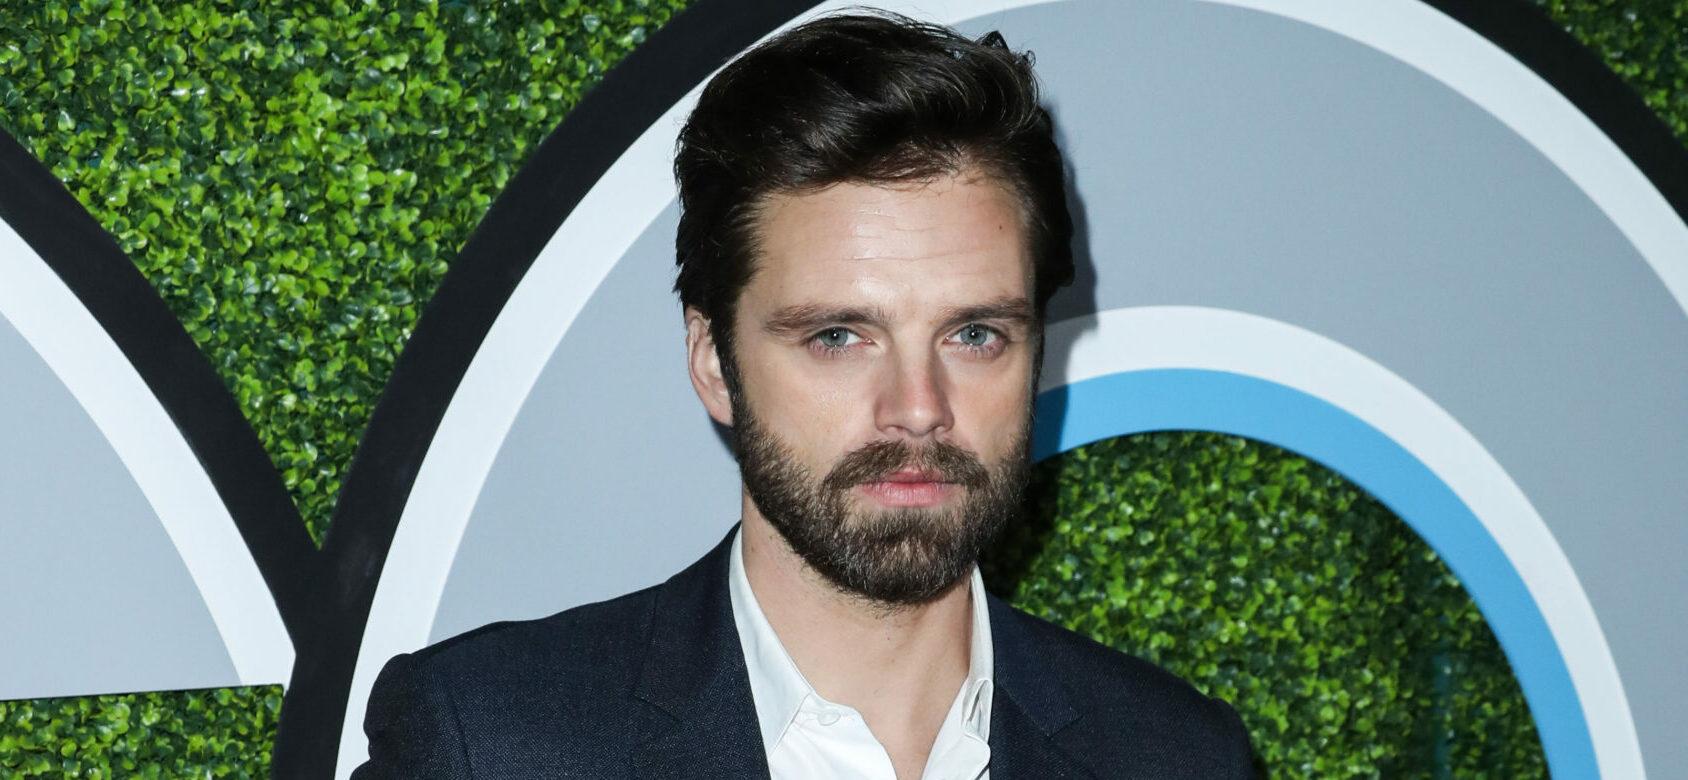 2017 GQ Men Of The Year Party held at Chateau Marmont on December 7, 2017 in West Hollywood, Los Angeles, California, United States. 07 Dec 2017 Pictured: Sebastian Stan.